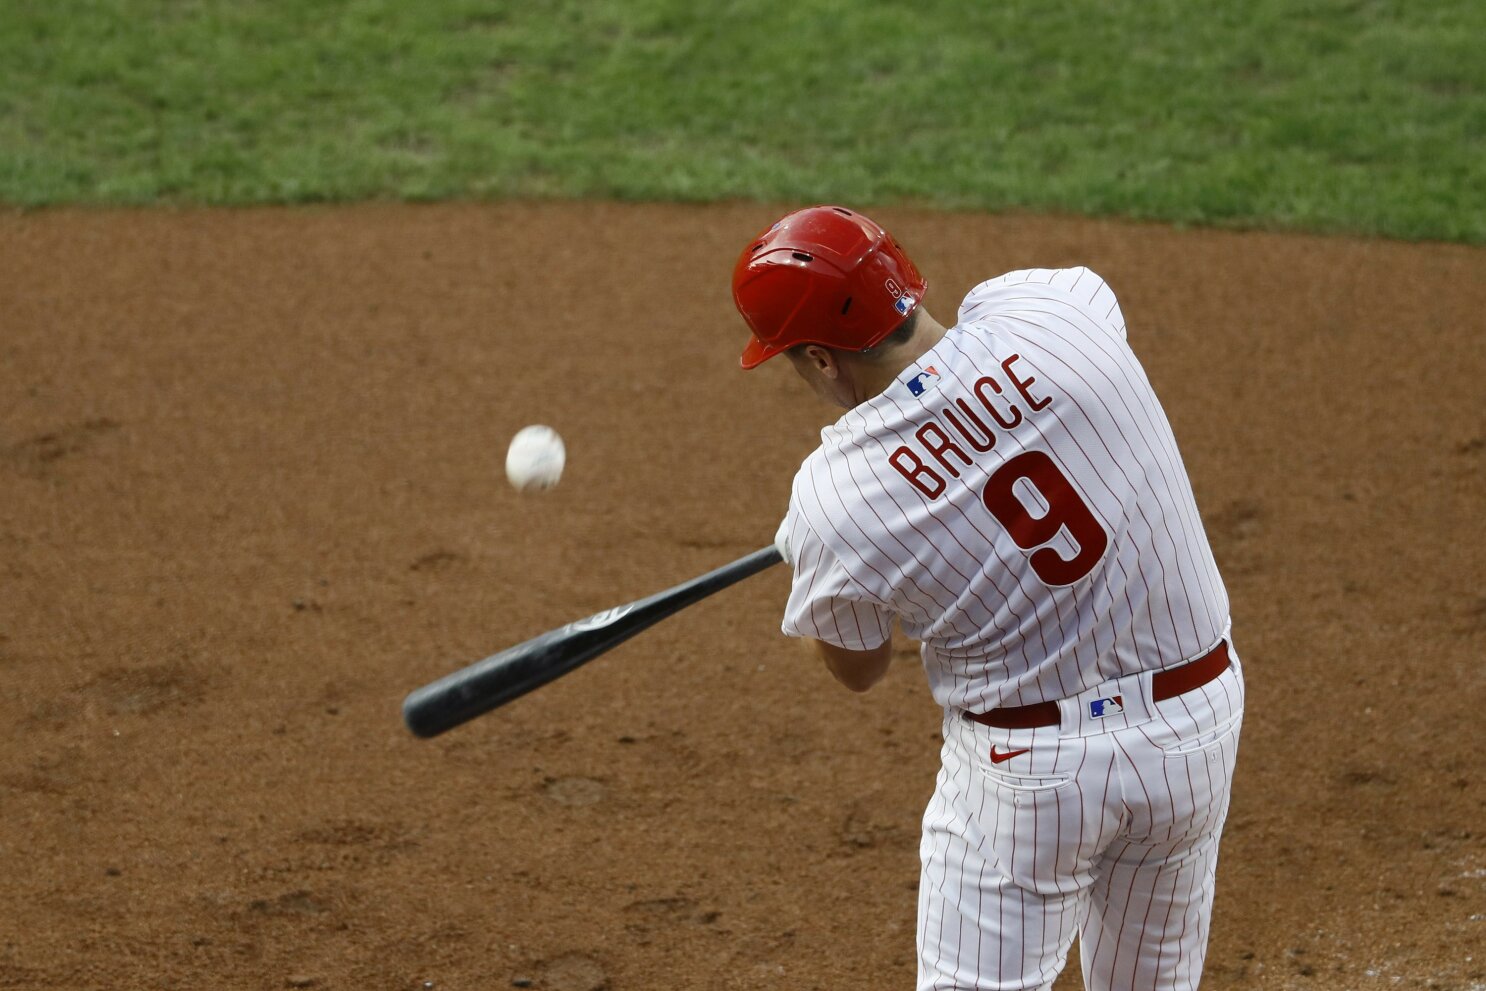 Phillies Alumni: Most games by second baseman